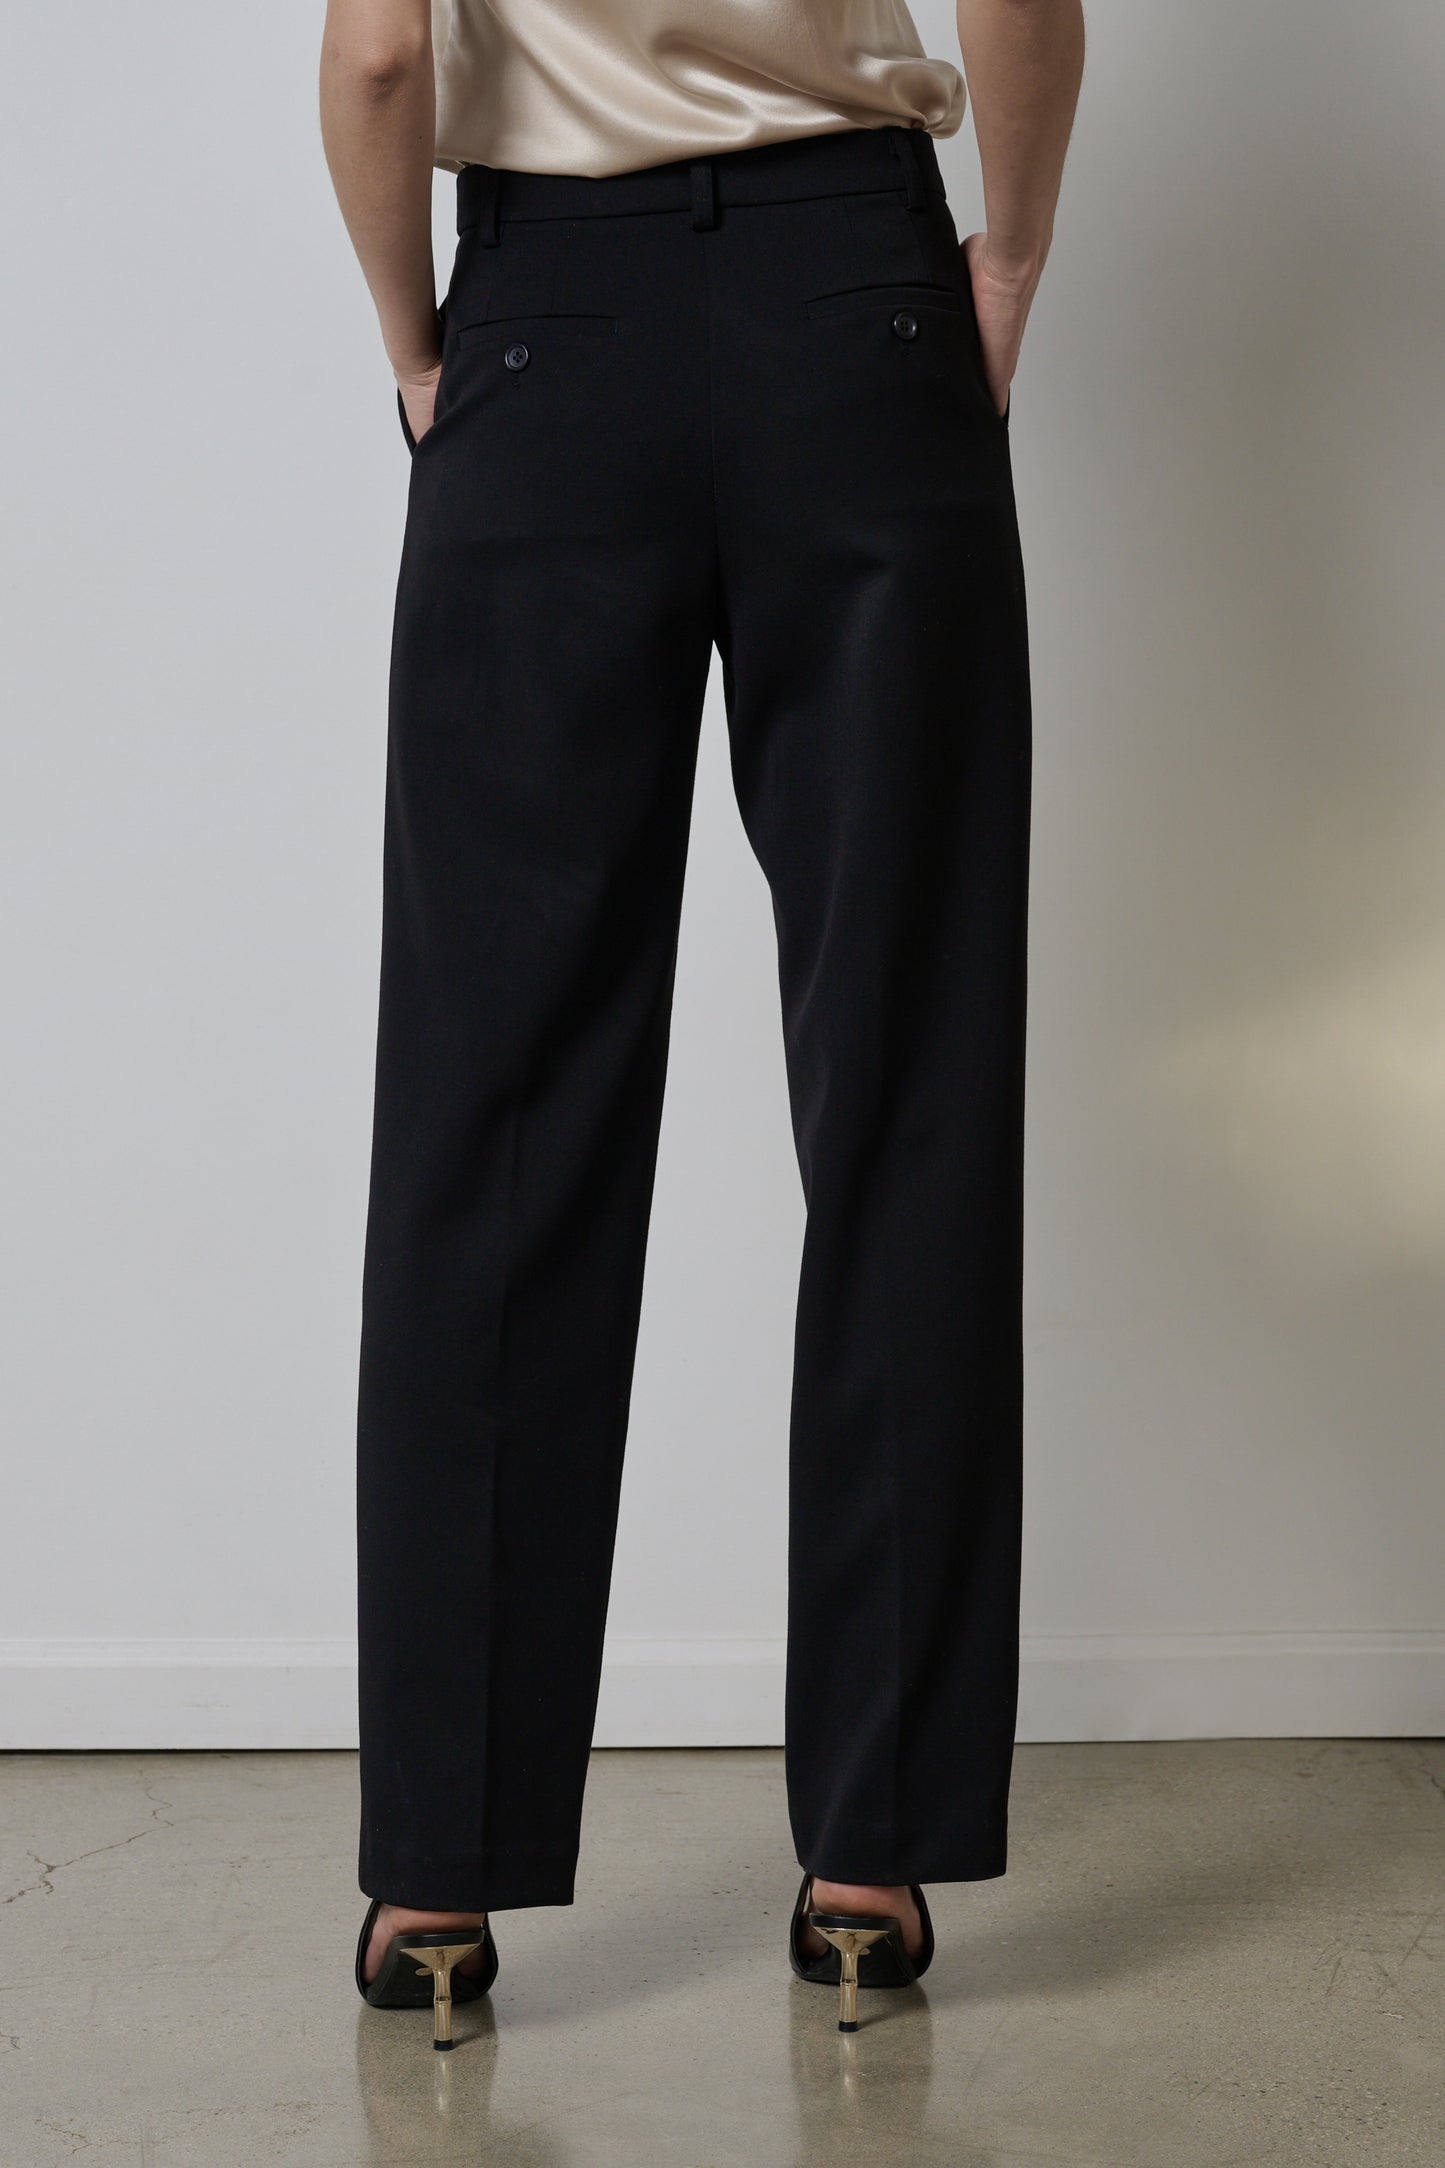 The back view of a person wearing BUNDY PANT trousers by Velvet by Jenny Graham.-26915009691841